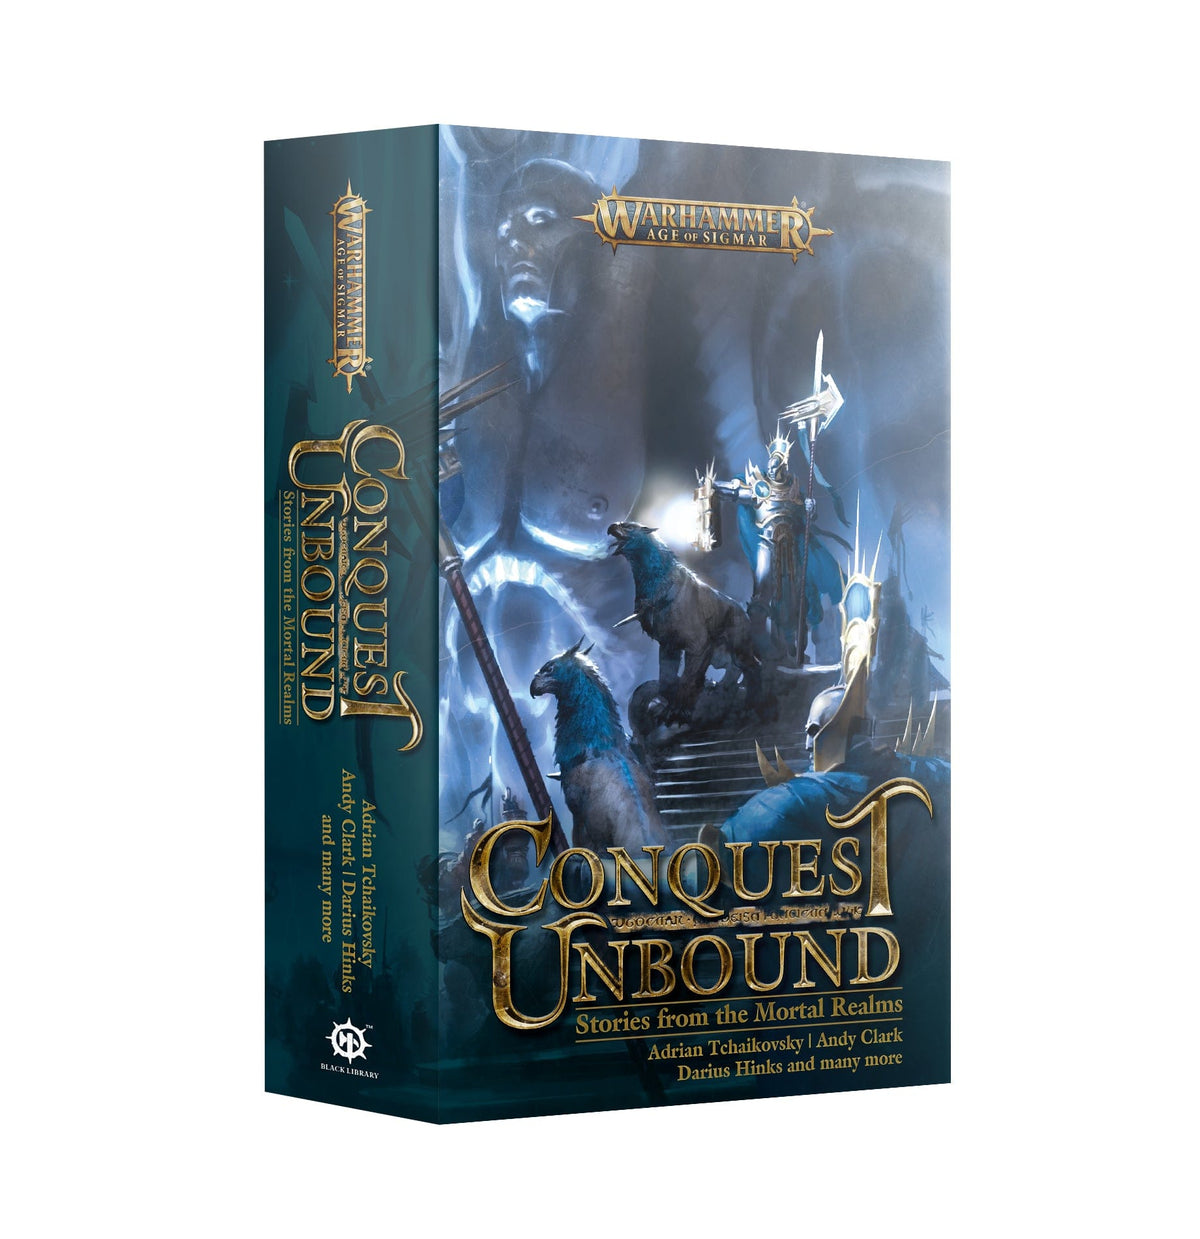 Warhammer - Age of Sigmar: Conquest Unbound - Stories from the Mortal Realms - Third Eye